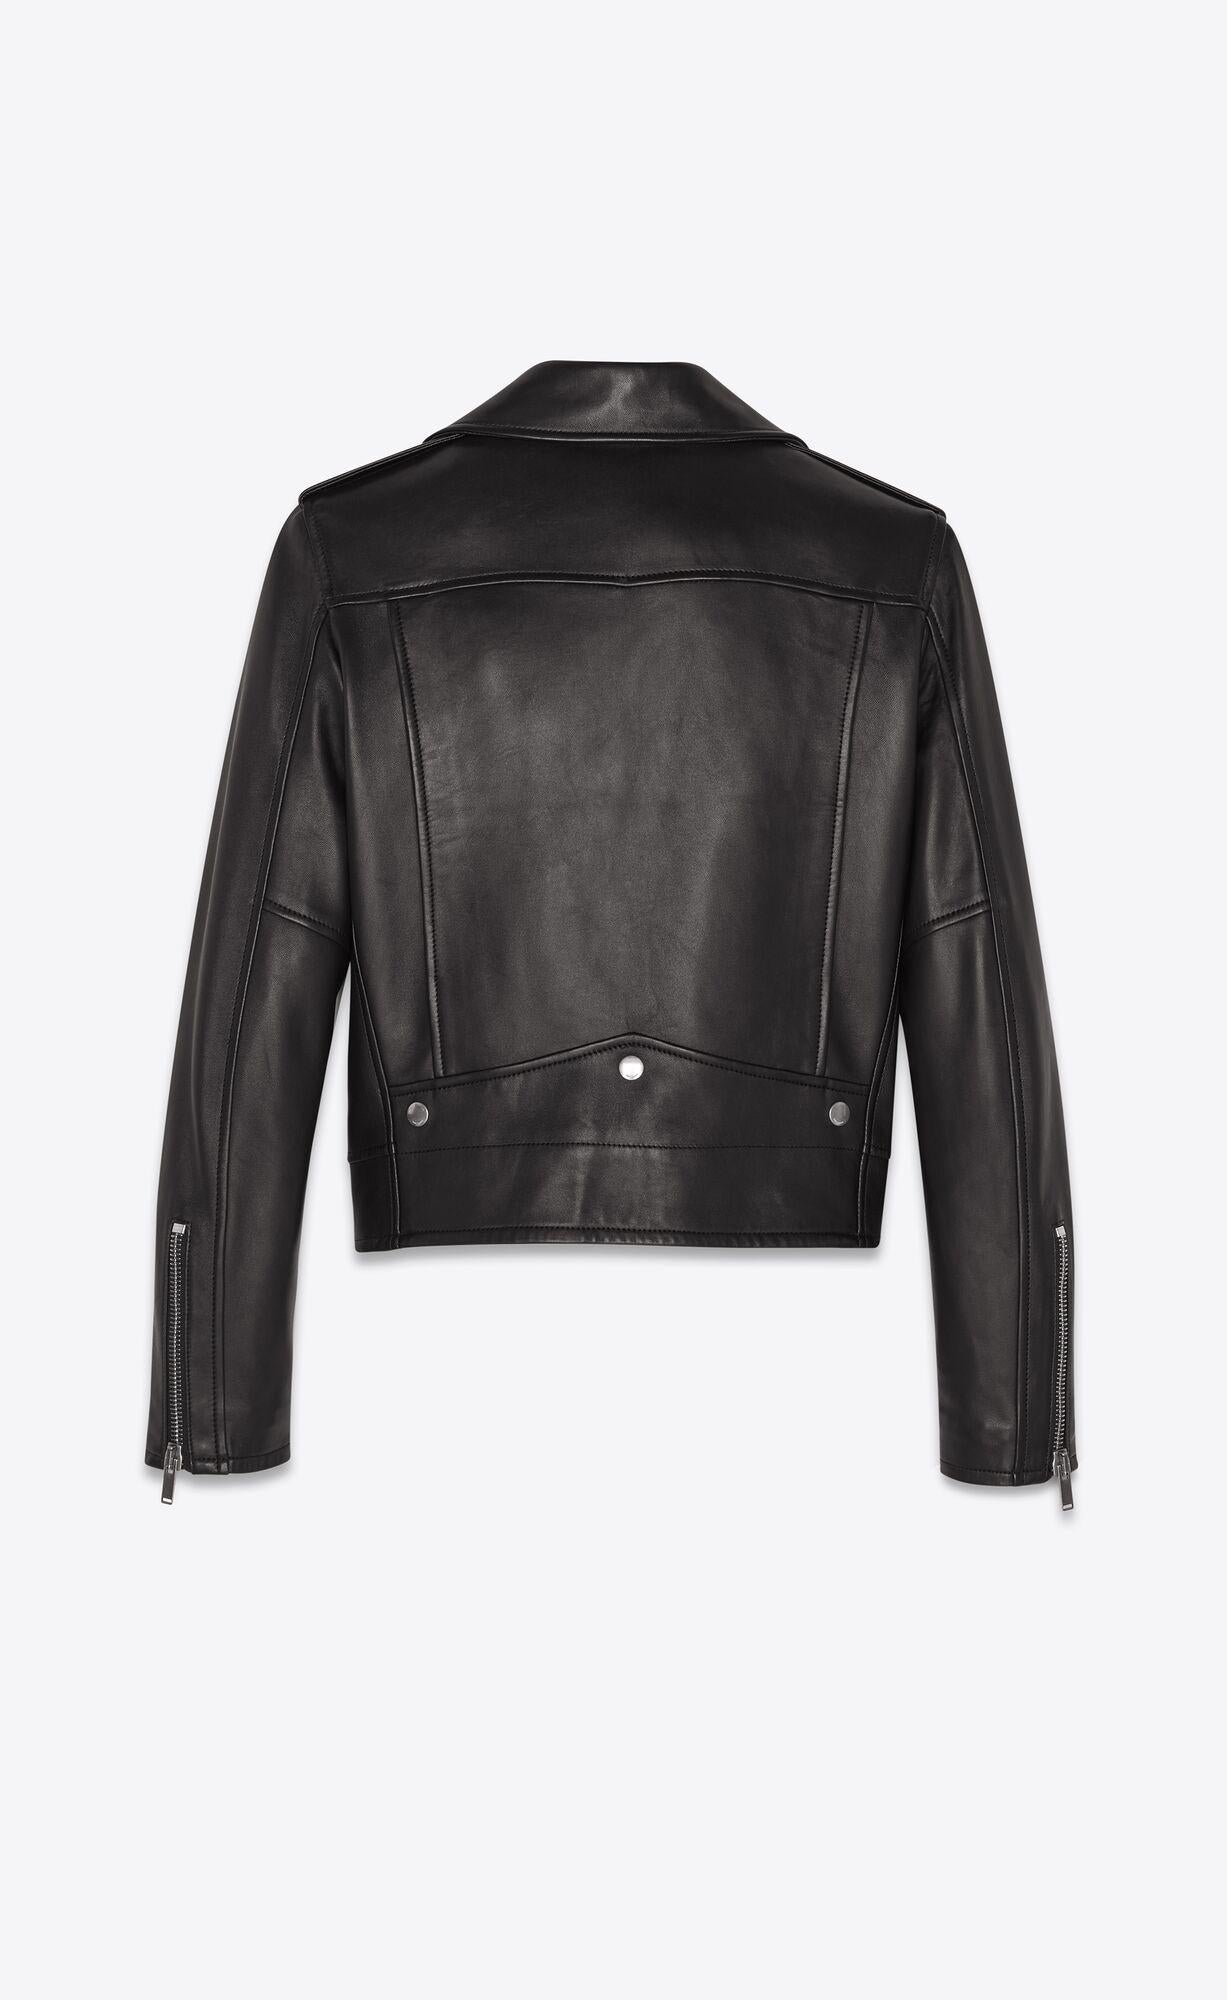 Saint Laurent Mens Classic Black Leather Motorcycle Biker Jacket

A staple in any man’s wardrobe, Saint Laurent's leather jacket puts a luxurious twist on the classic. Italian made, it takes design cues from biker styles with its lambskin leather